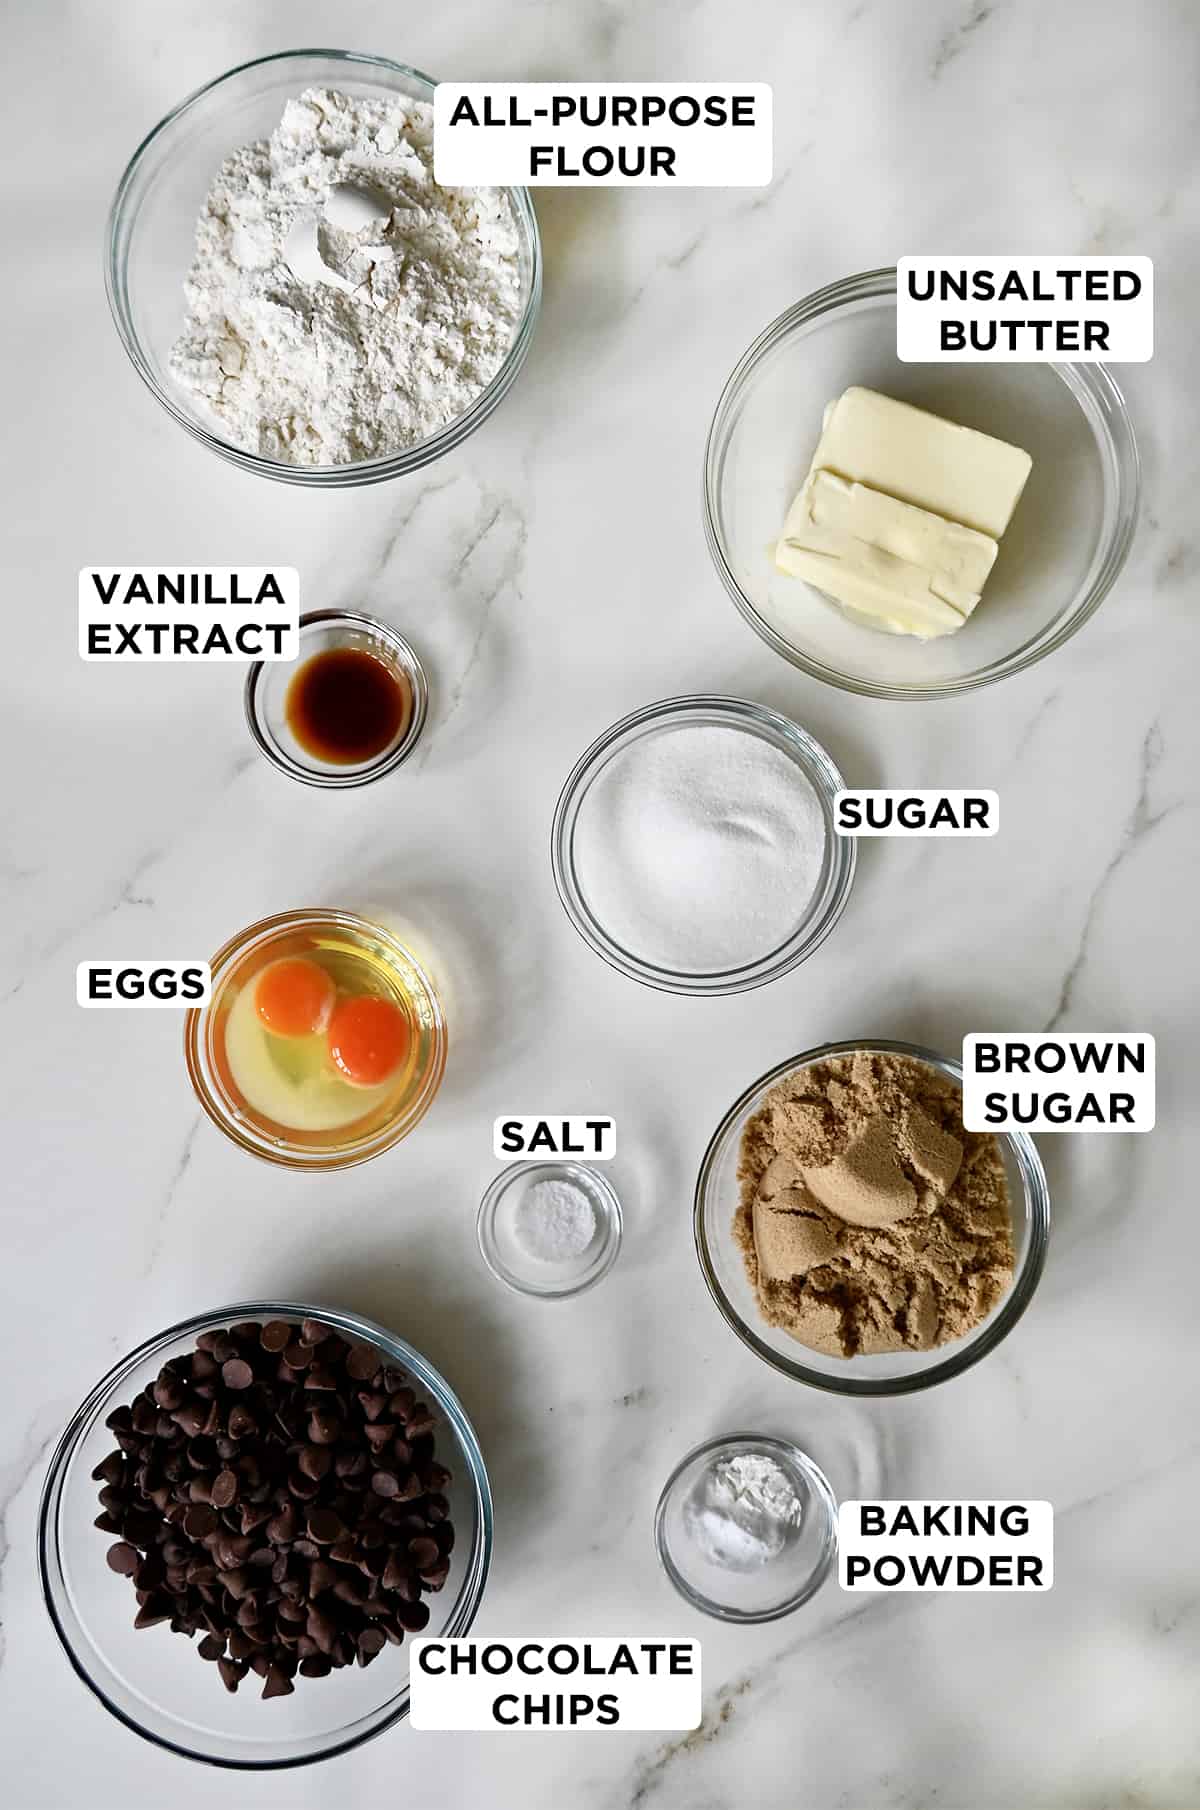 A top-down view of various sized bowls containing flour, butter, sugar, brown sugar, salt, eggs, vanilla extract, chocolate chips and baking powder.